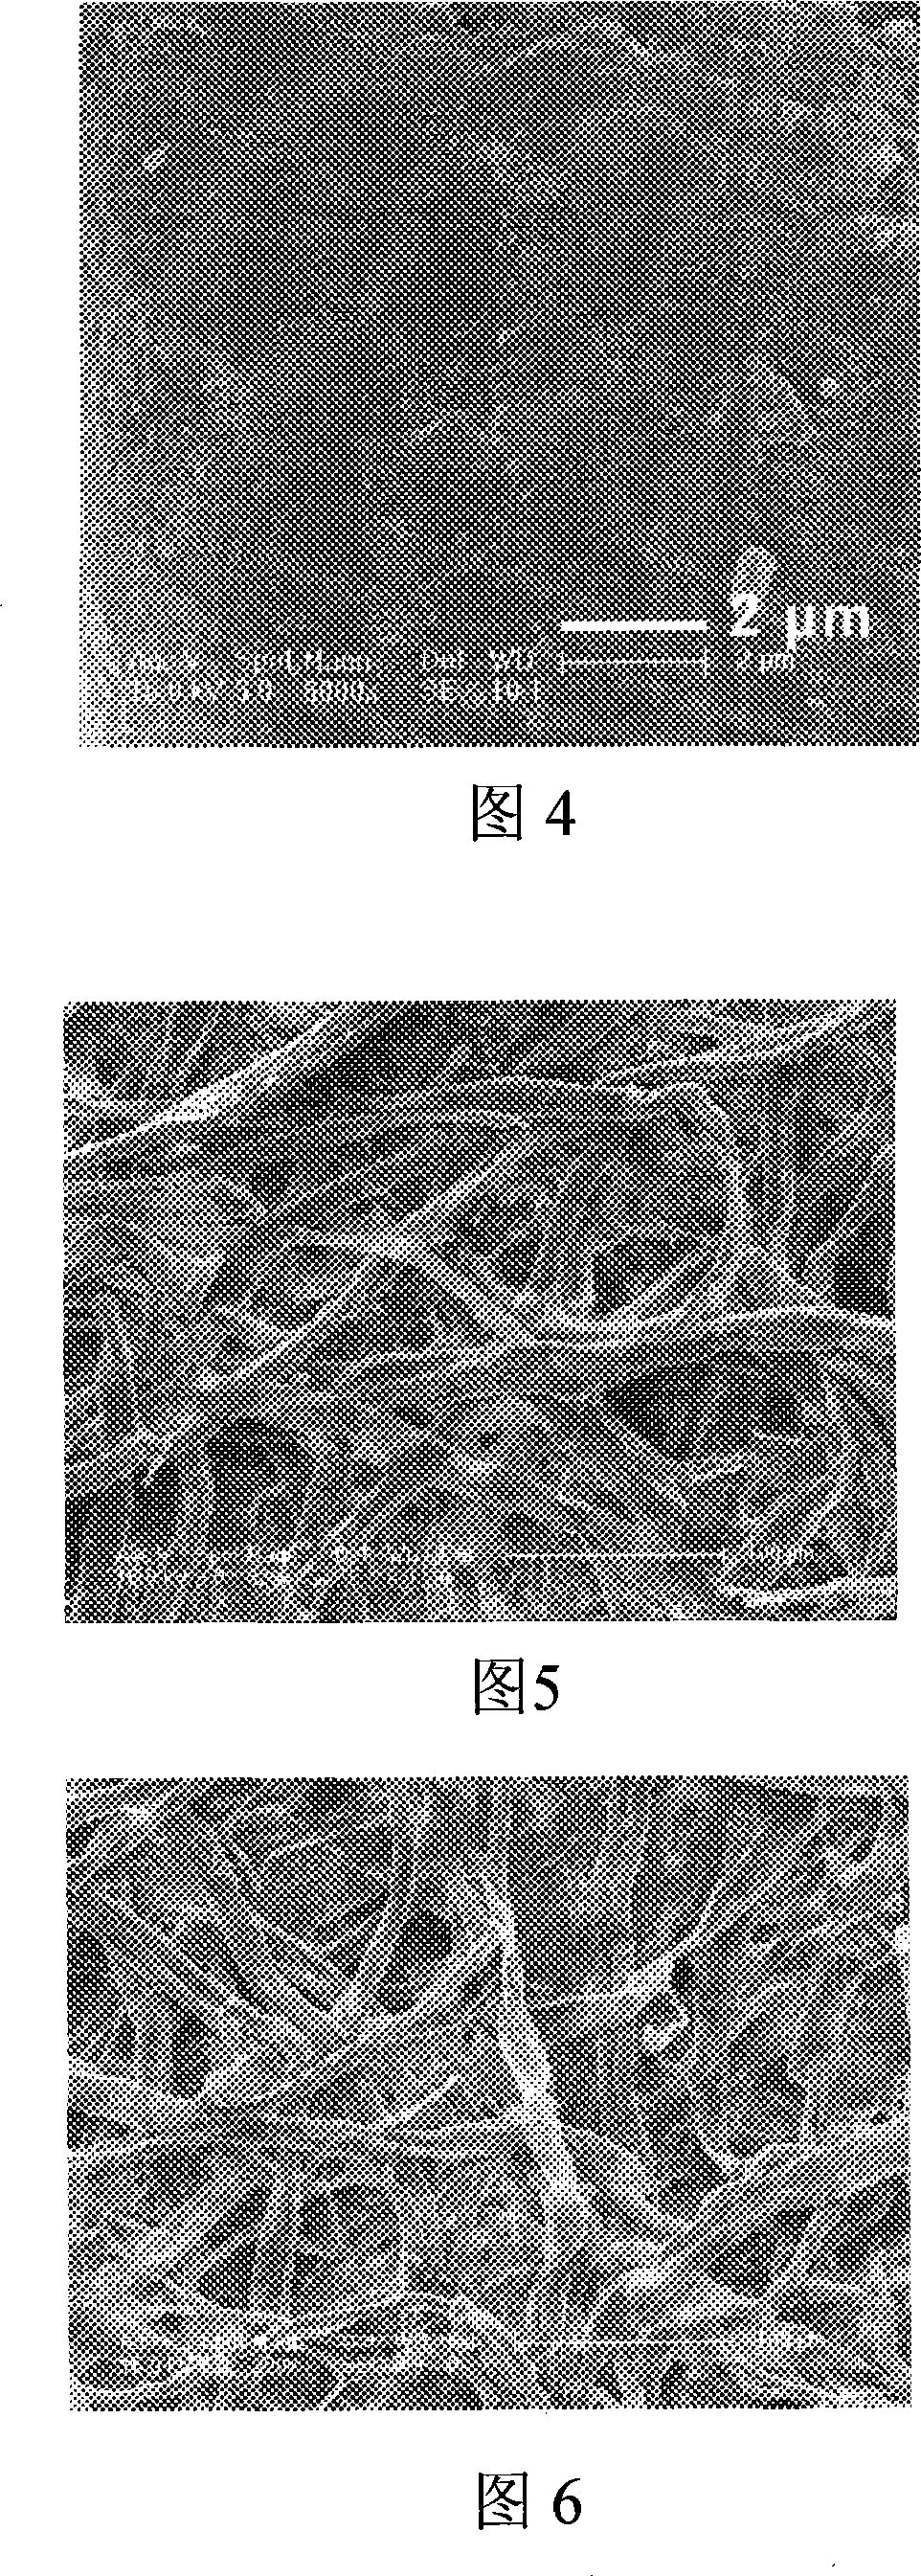 Preparation method and use for ultra-hydrophobic cotton fibrous material or ultra-hydrophobic paper fibrous material